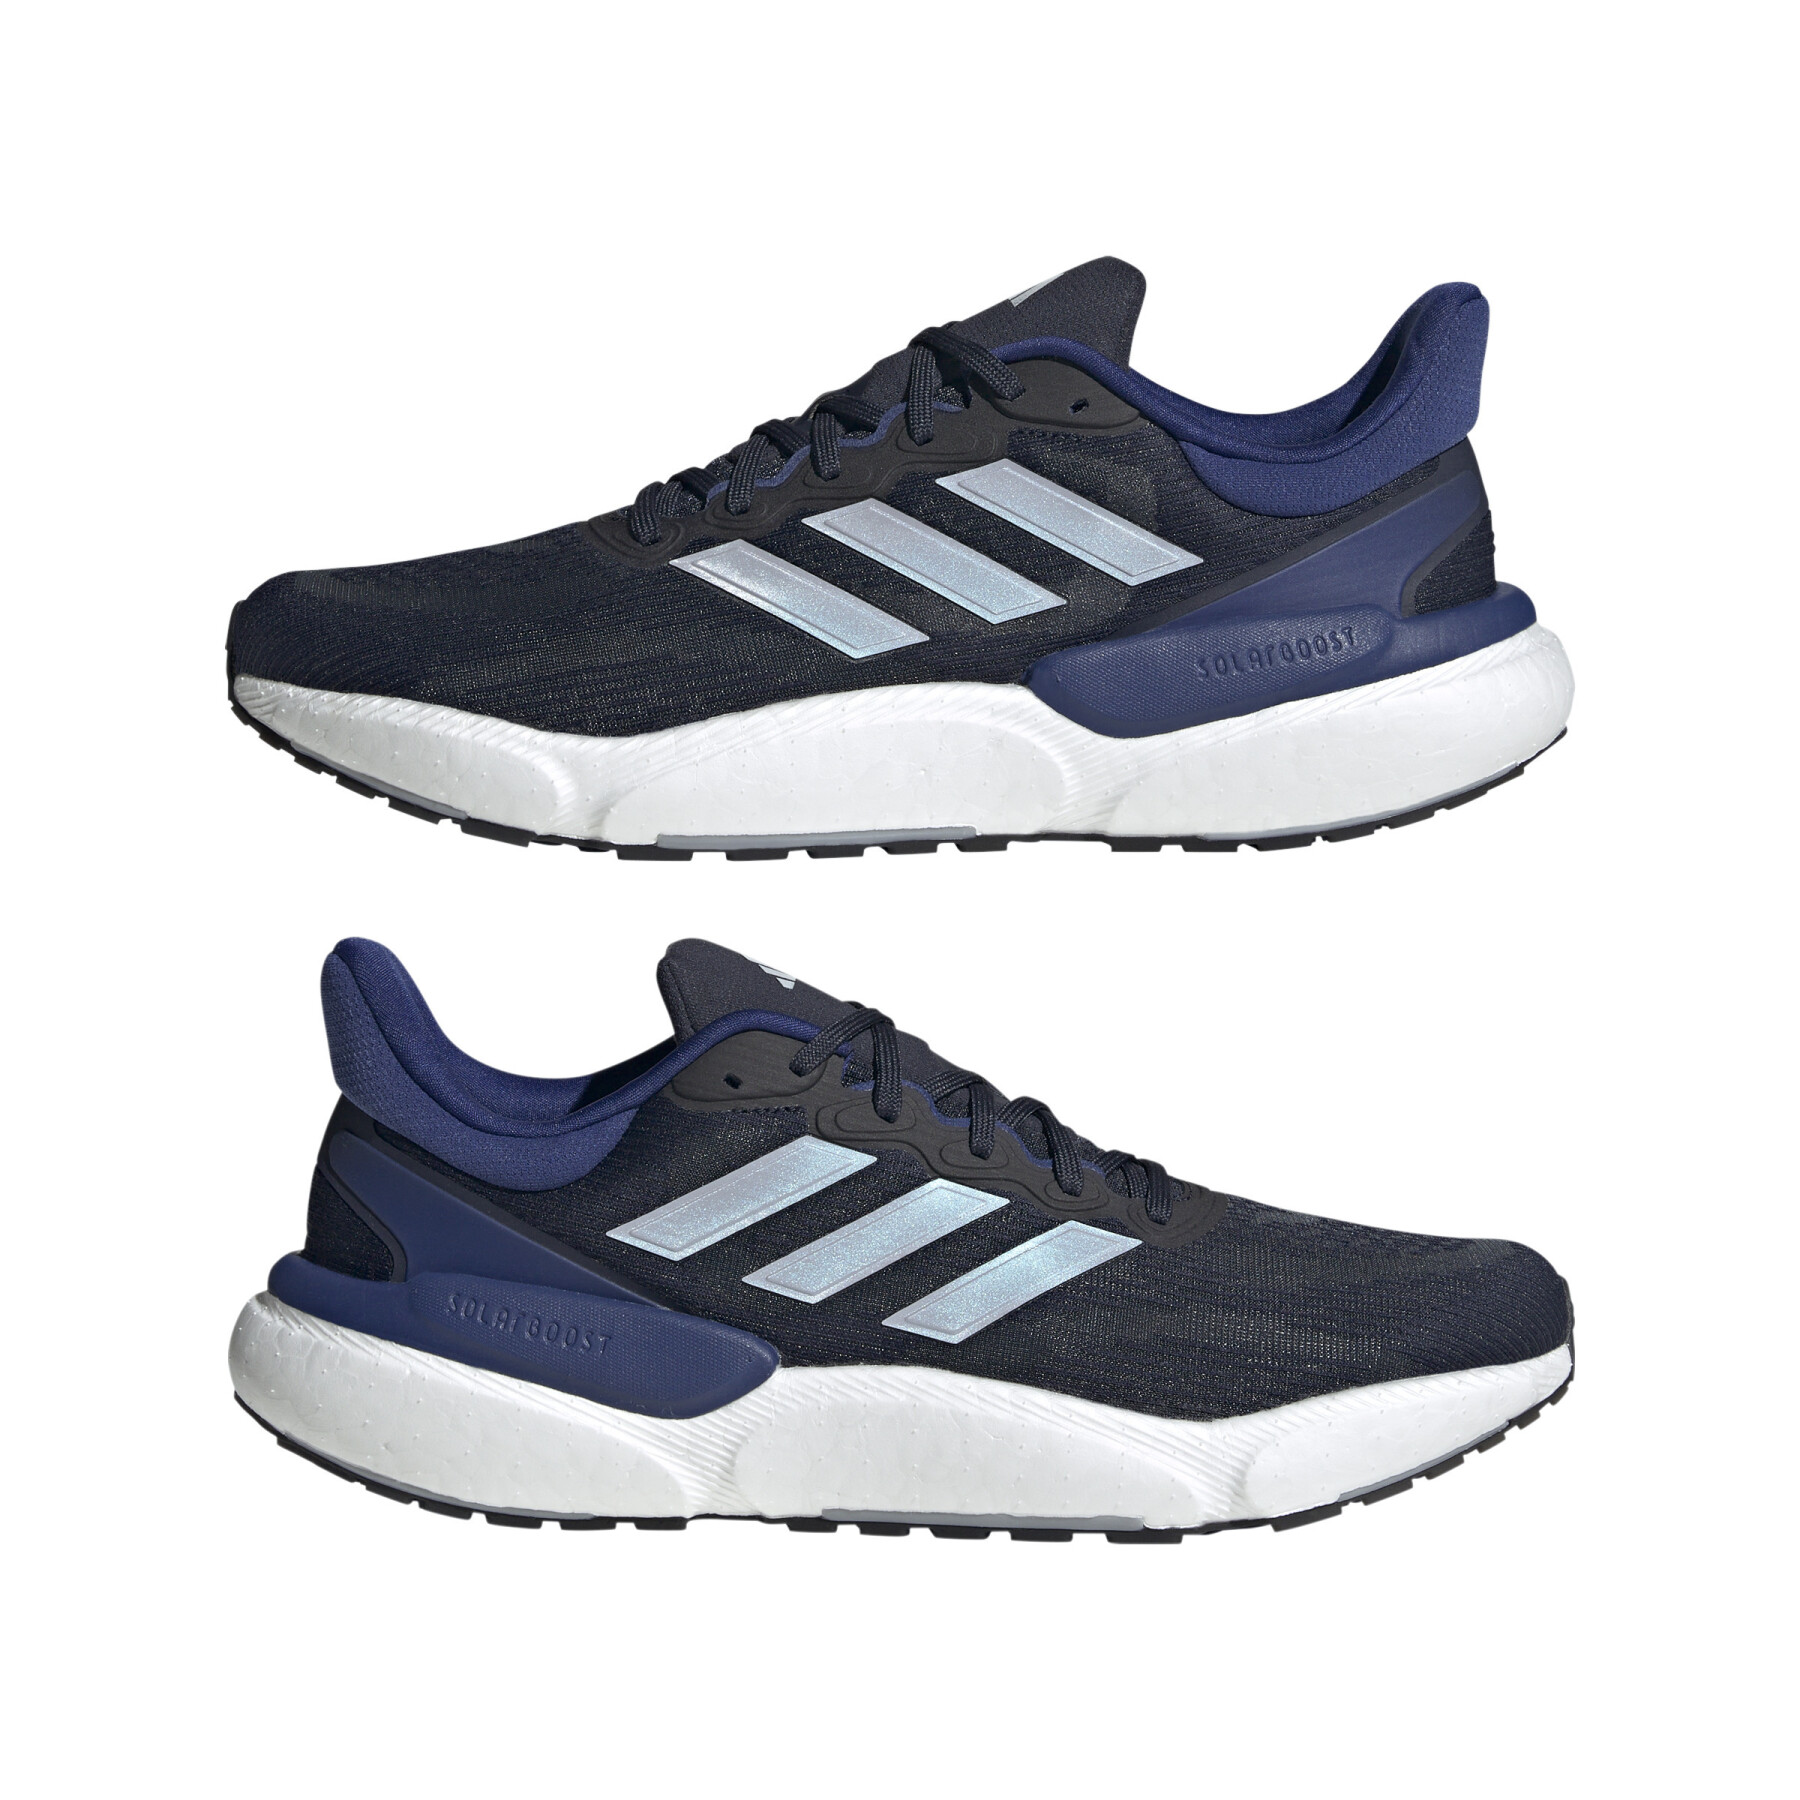 Running shoes adidas Solarboost 5